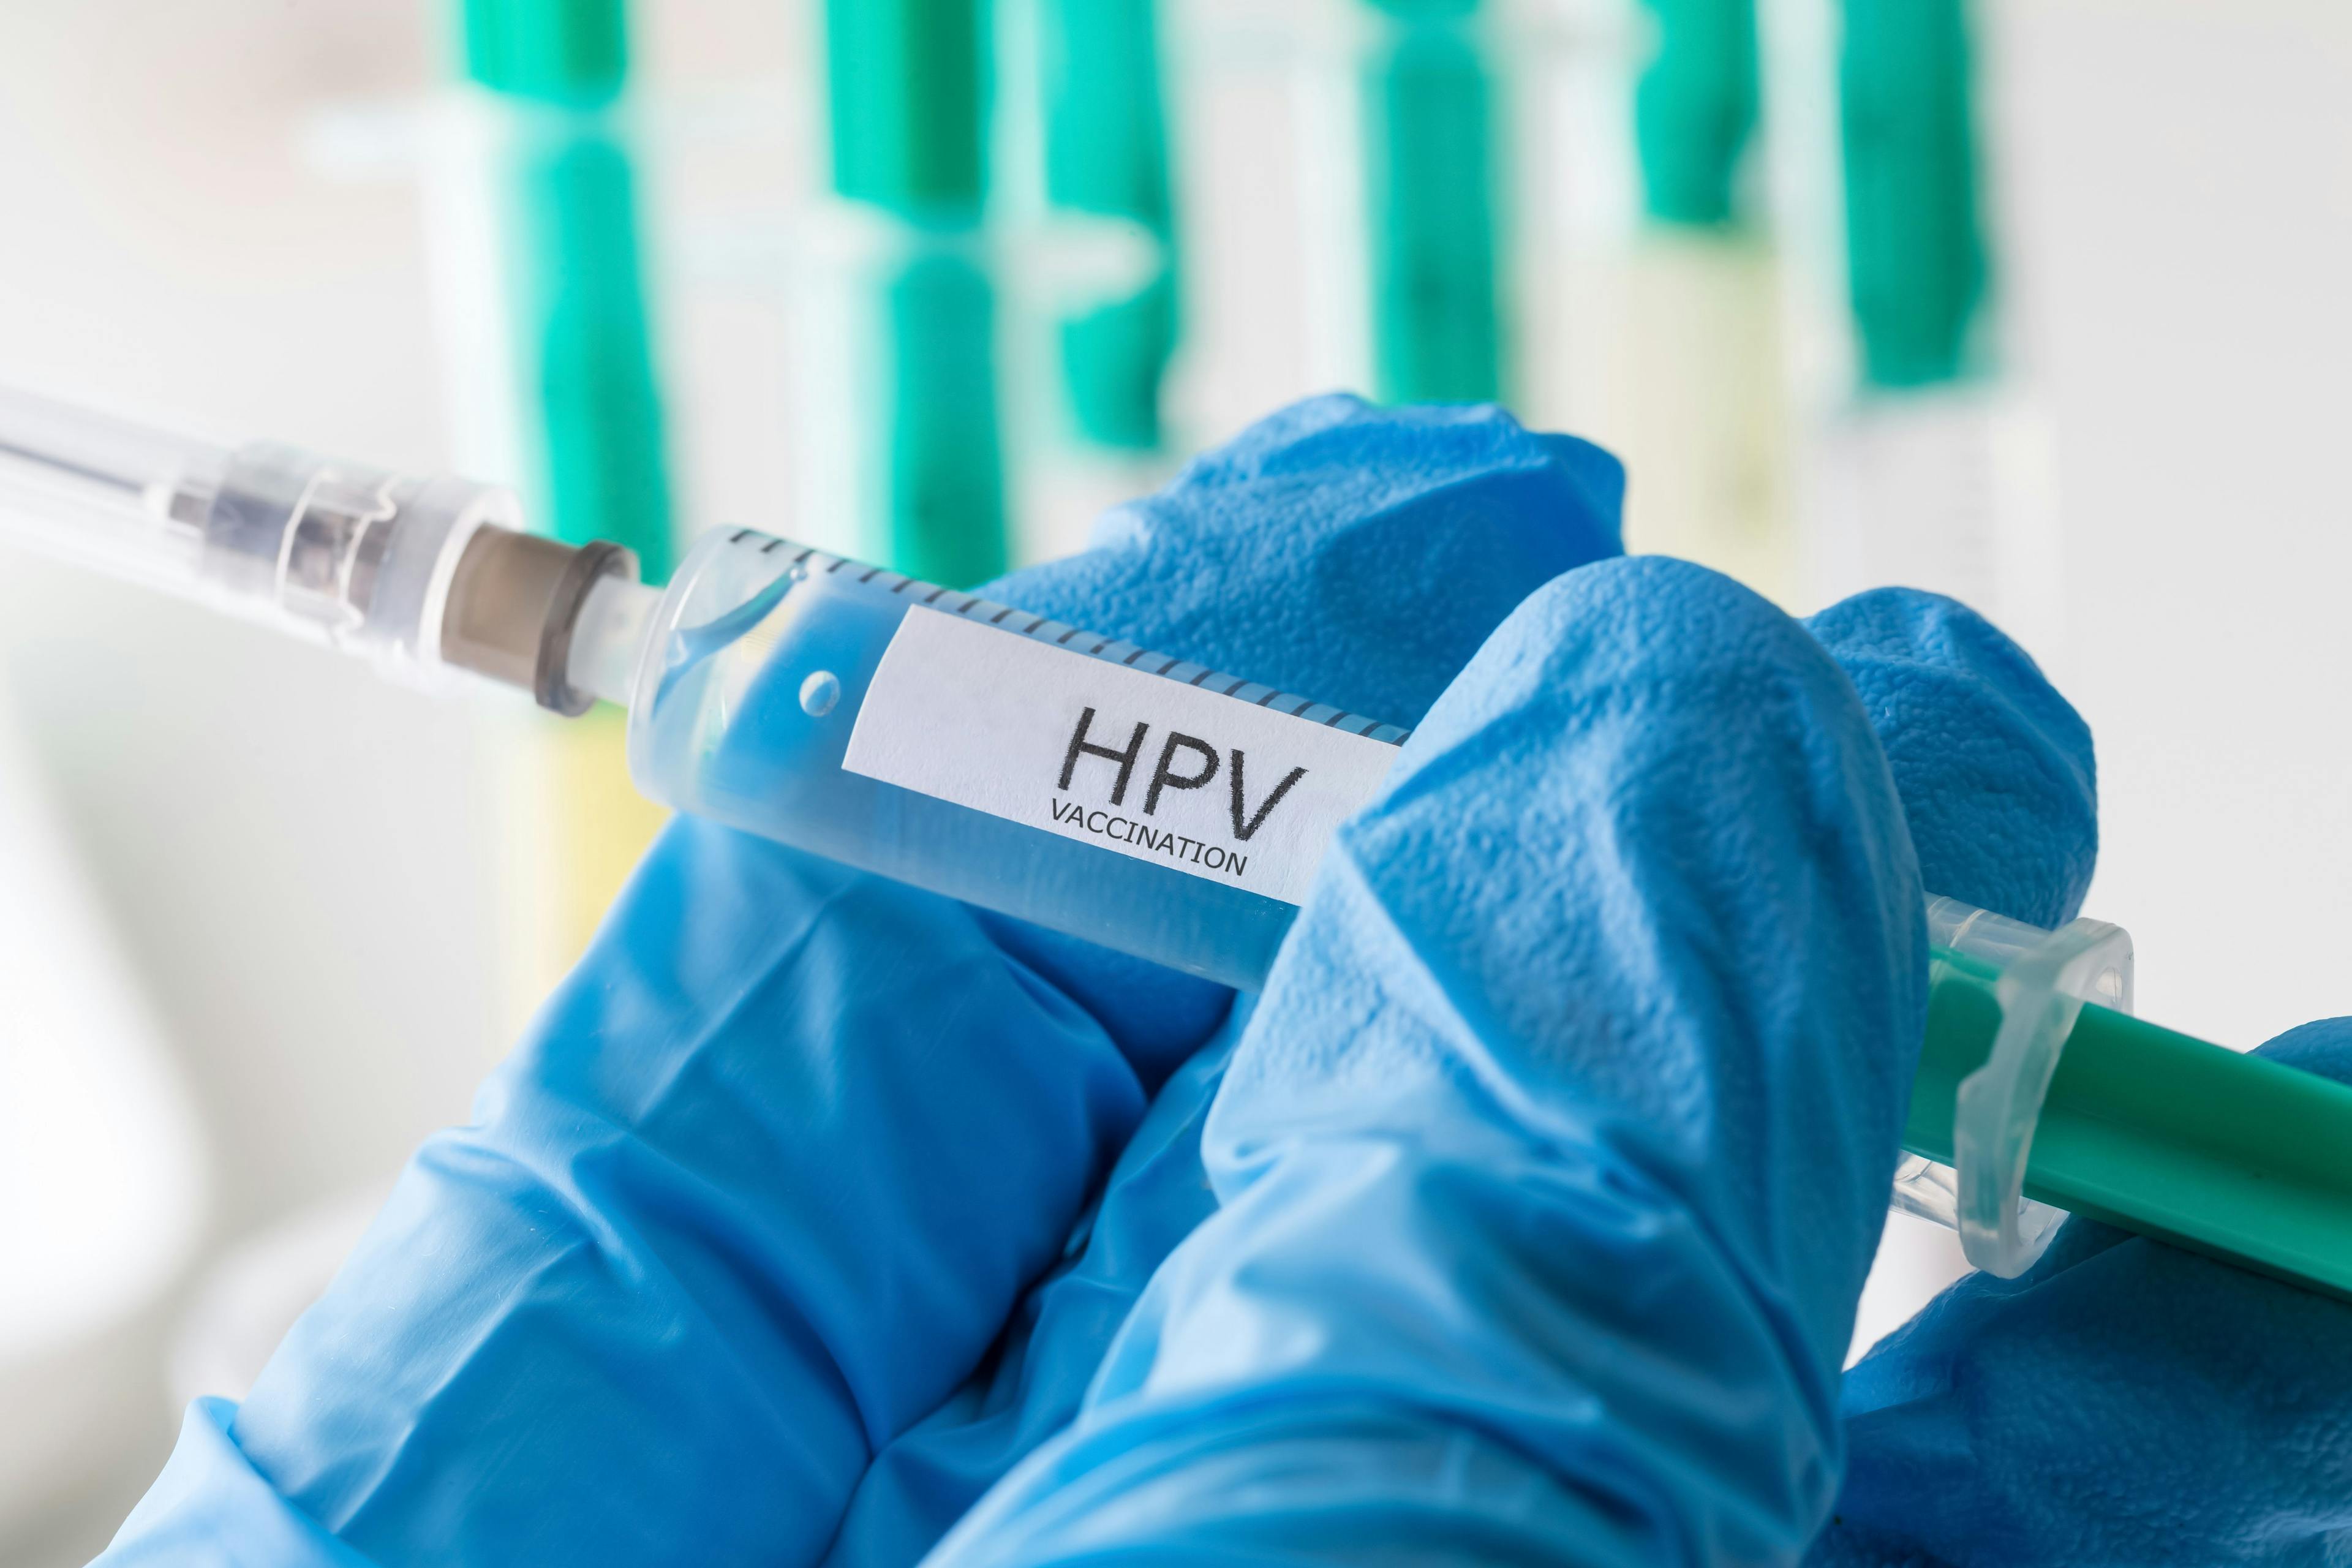 HPV vaccine trial examines safety and efficacy